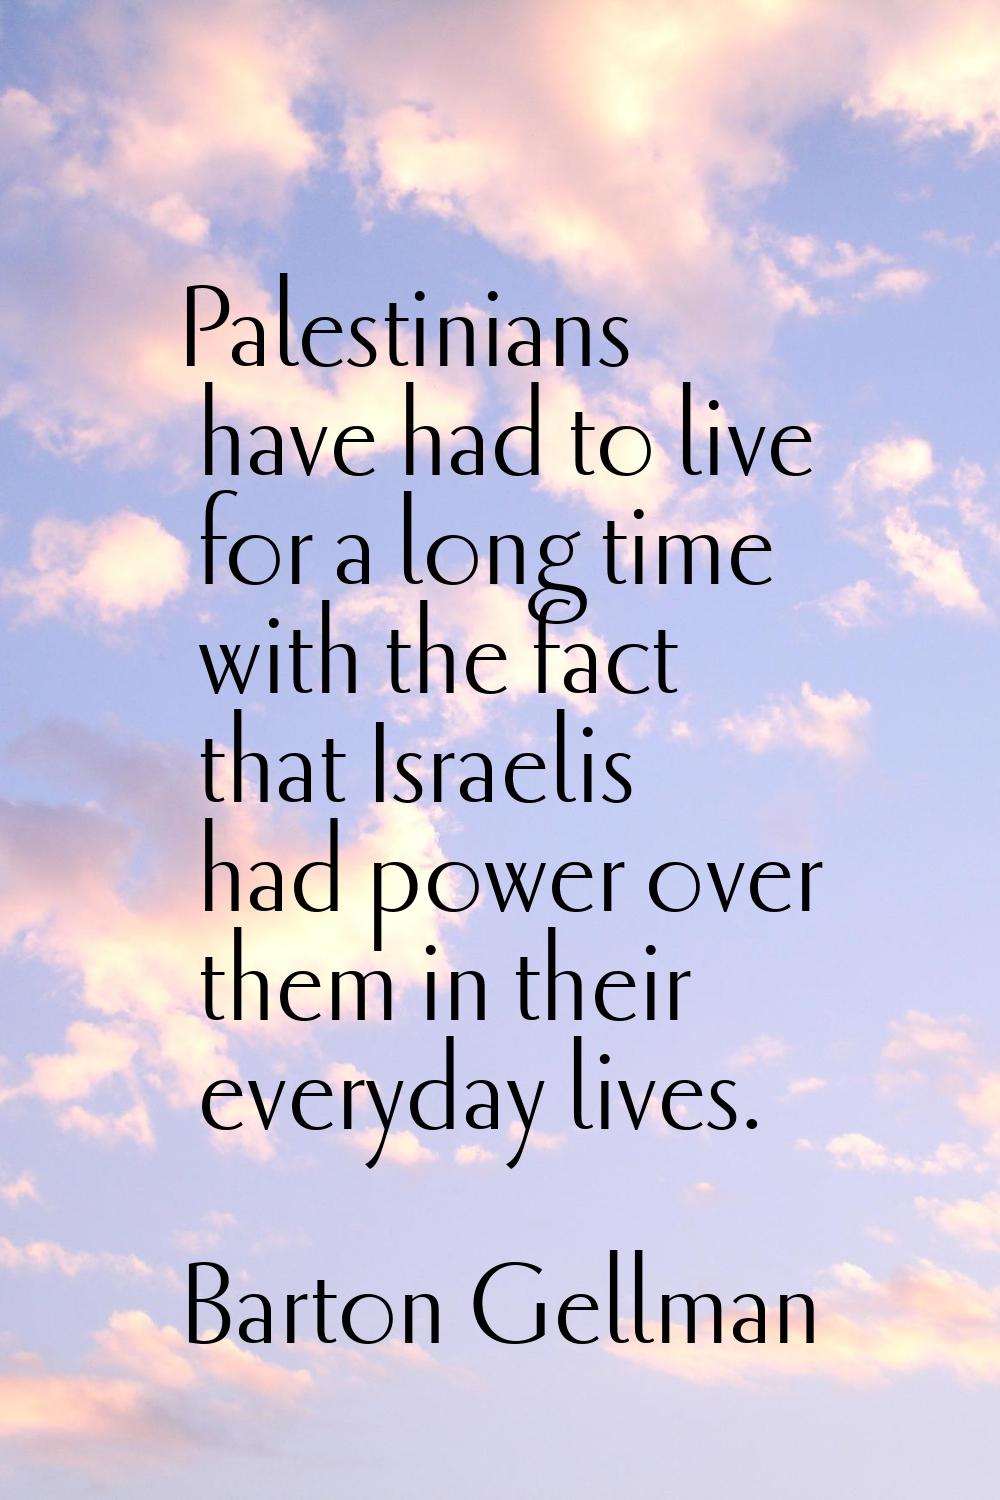 Palestinians have had to live for a long time with the fact that Israelis had power over them in th